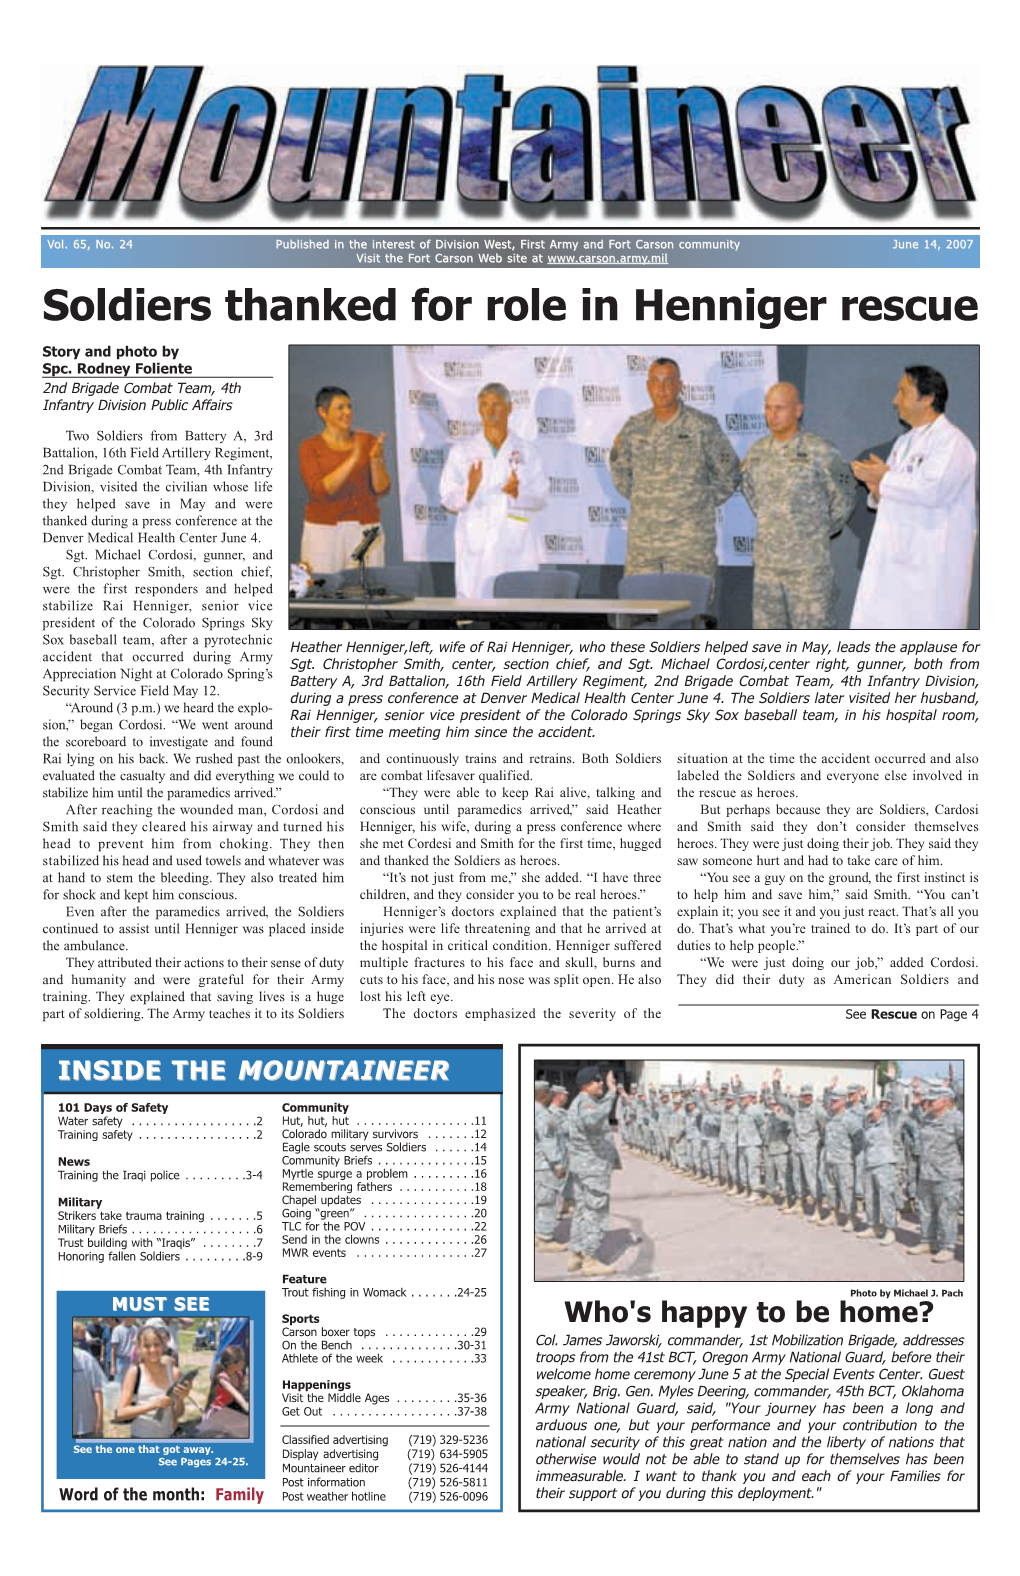 June 14, 2007 Visit the Fort Carson Web Site at Soldiers Thanked for Role in Henniger Rescue